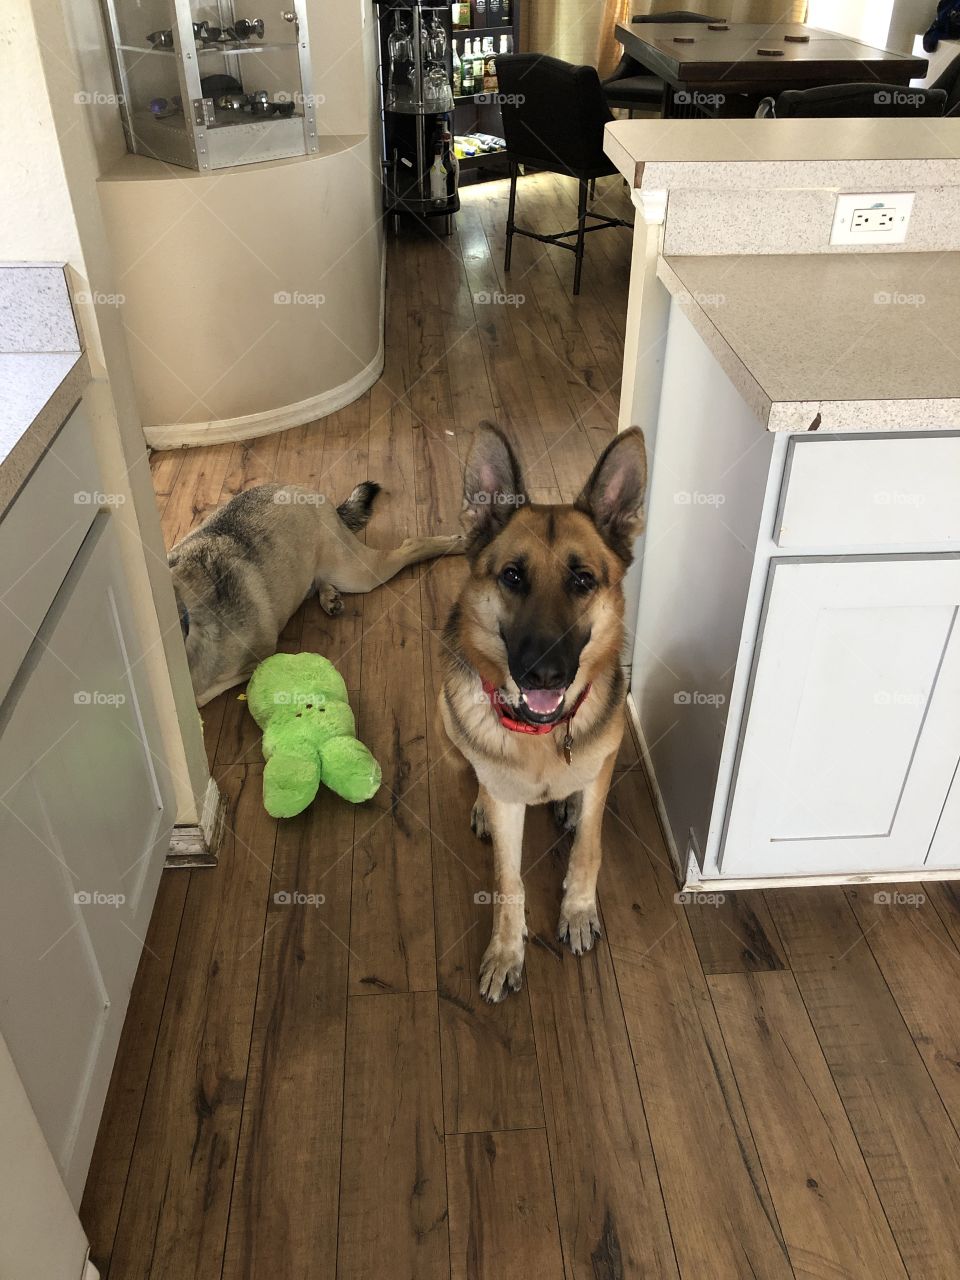 Jax and his new toys